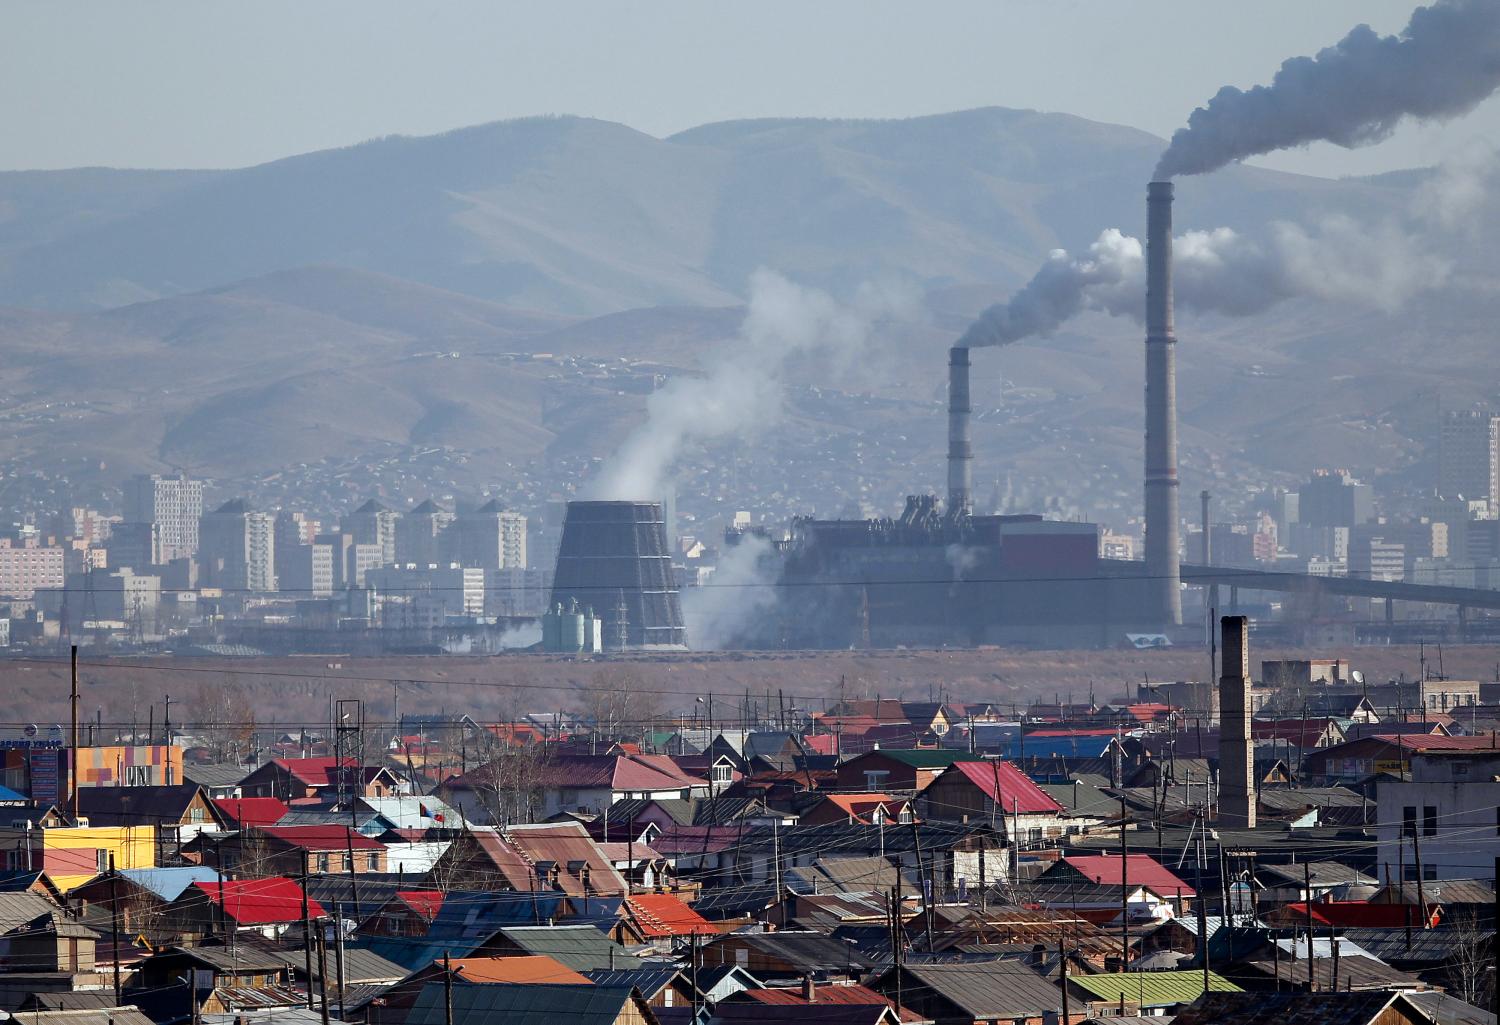 Smoke billows from the chimneys of a coal-burning power plant in Ulan Bator October 14, 2011.